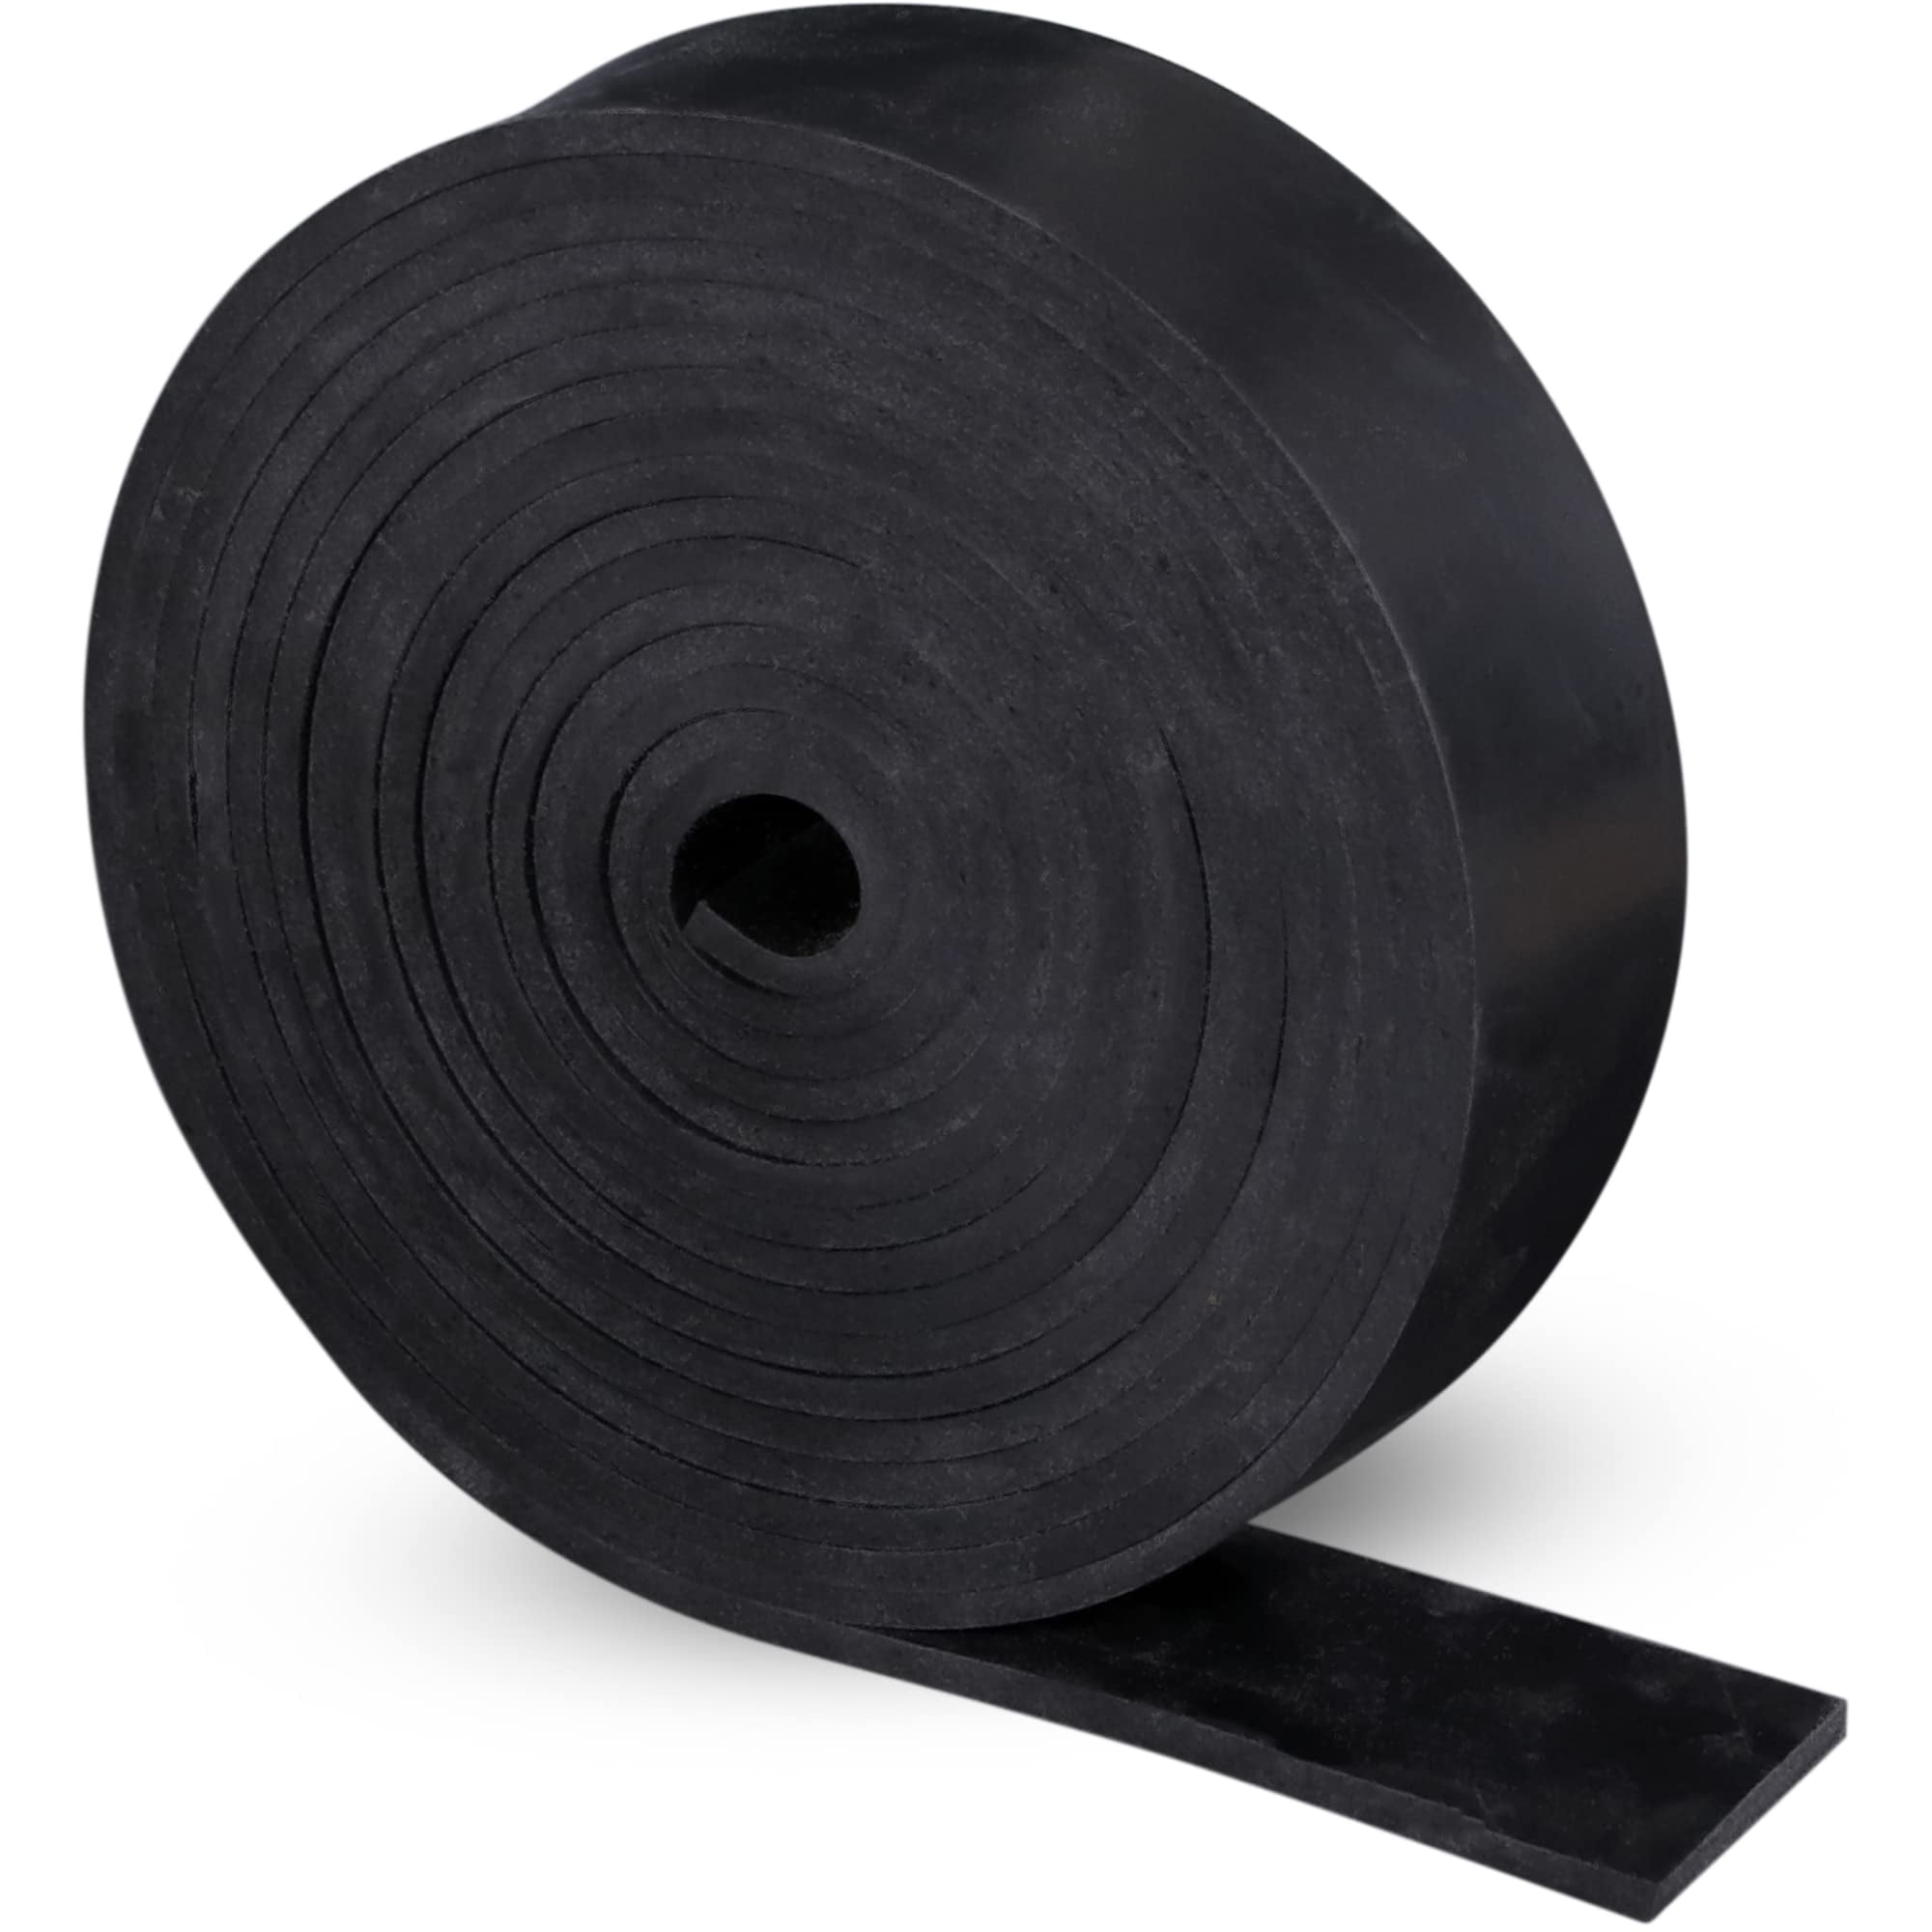  Nisorpa Neoprene Rubber Sheet Roll 1/8 Thick, Rubber Mats  118x39 Rubber Matting Insulating Mat Rubber Strips Anti-Slip Rubber  Gasket Material Anti Vibration Rubber Pads for Sealing Garage : Industrial  & Scientific